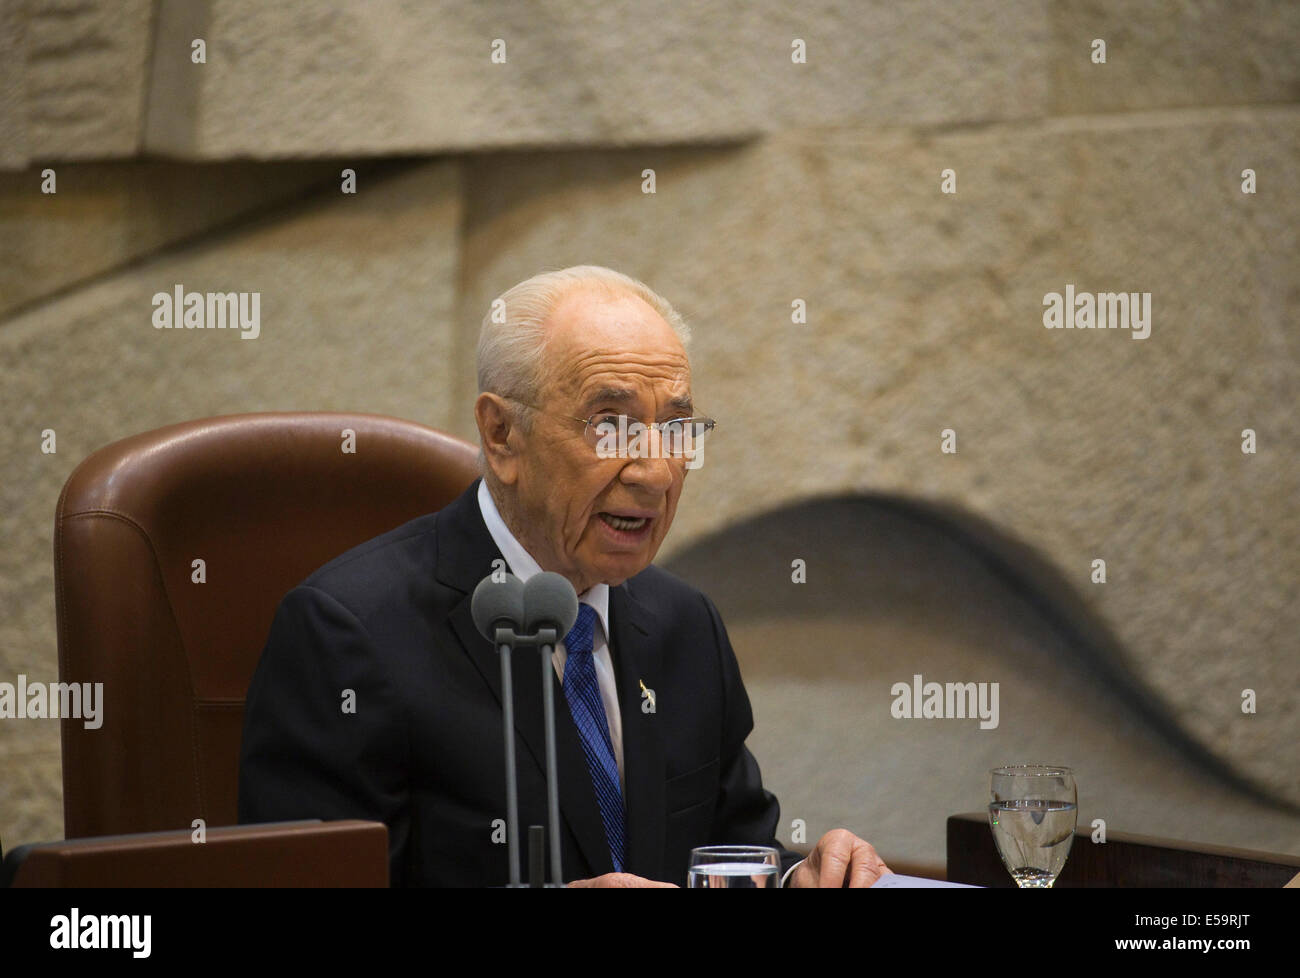 (140724) -- JERUSALEM, July 24, 2014 (Xinhua) -- Outgoing Israeli President Shimon Peres addresses Reuven Rivlin's swearing-in ceremony at the Knesset (Israeli parliament) in Jerusalem, on July 24, 2014. Israeli lawmaker Reuven Rivlin was sworn in as the tenth president of Israel on Thursday evening, stepping in the role filled by Shimon Peres for the past seven years. (Xinhua/POOL/Ronen Zvulun) Stock Photo